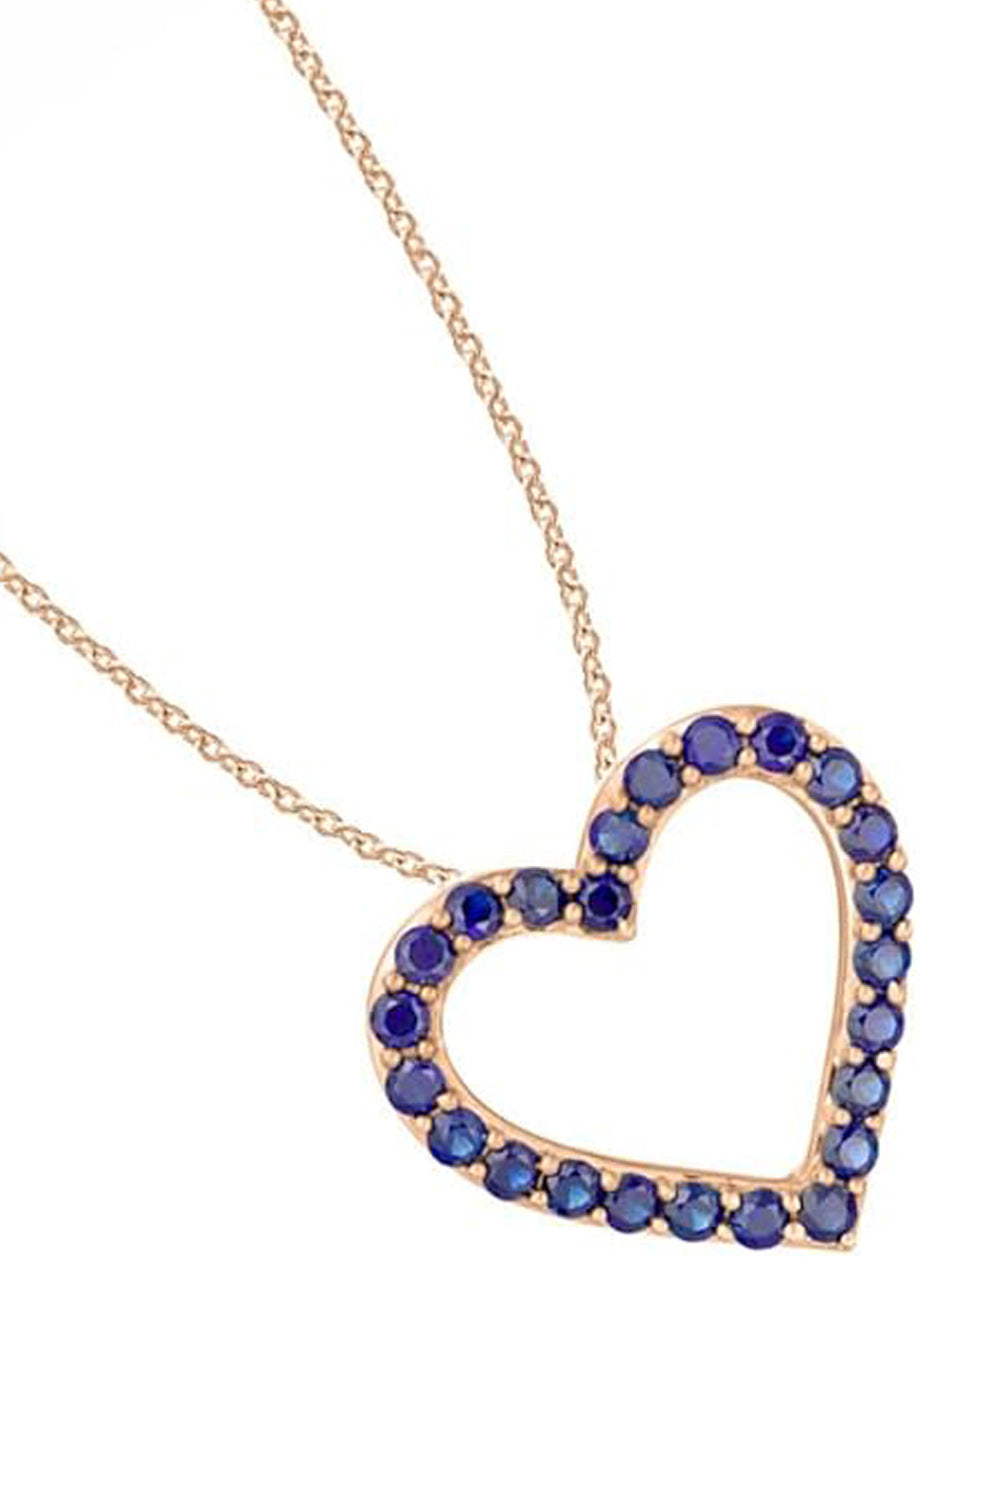 Rose Gold Chain with Blue Sapphire Open Heart Pendant